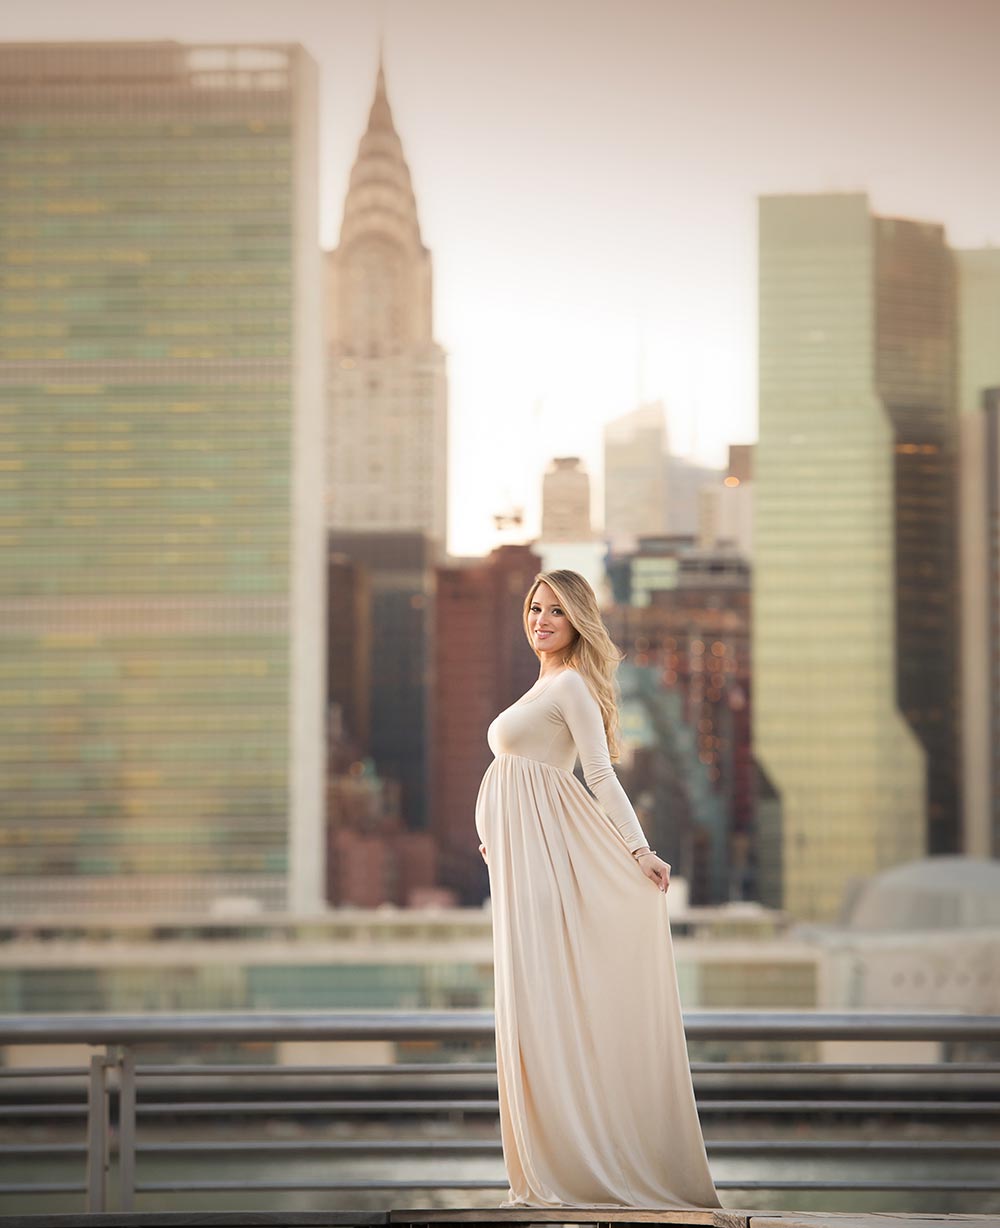 Pregnant blonde woman in a long dress posing in front of the NYC skyline by East River.